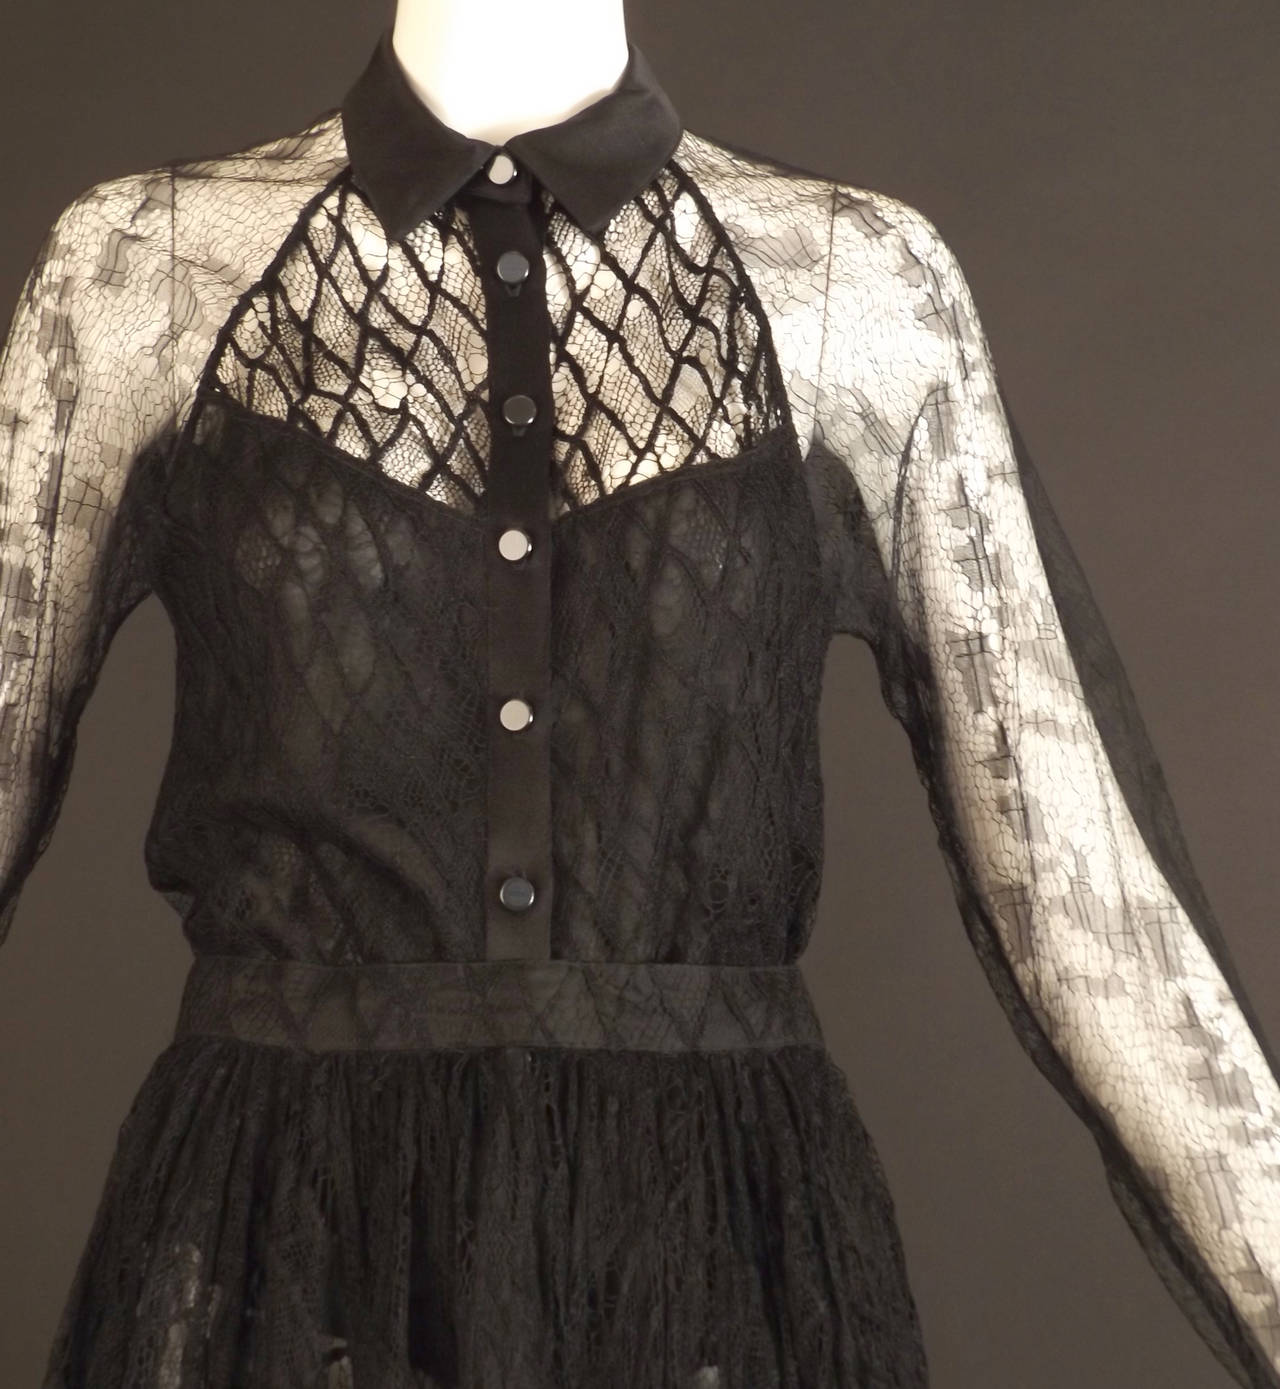 Wonderful c.1990s 2pc dress in black lace. The blouse has a black silk satin collar and button closures down the front silk placket.  The body of the blouse is a spider web lace with a larger diamond pattern. The chest yoke is unlined while the body